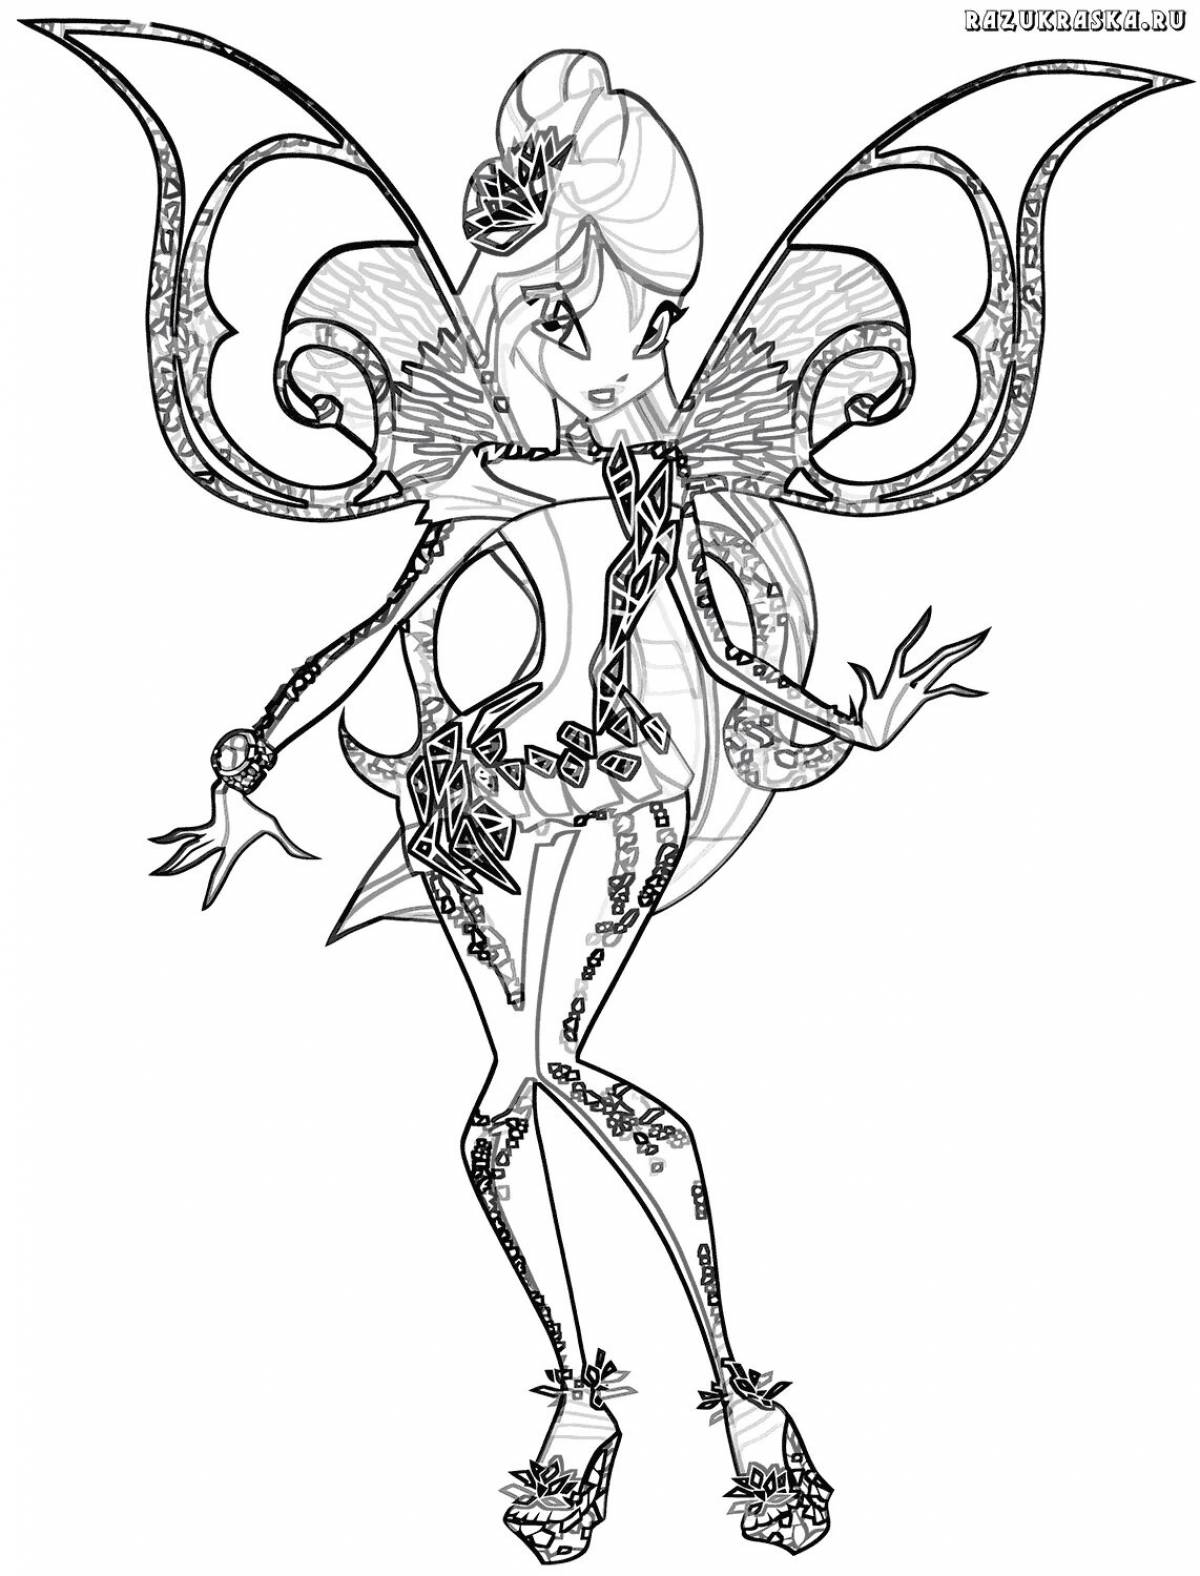 Cute tynyx winx coloring page